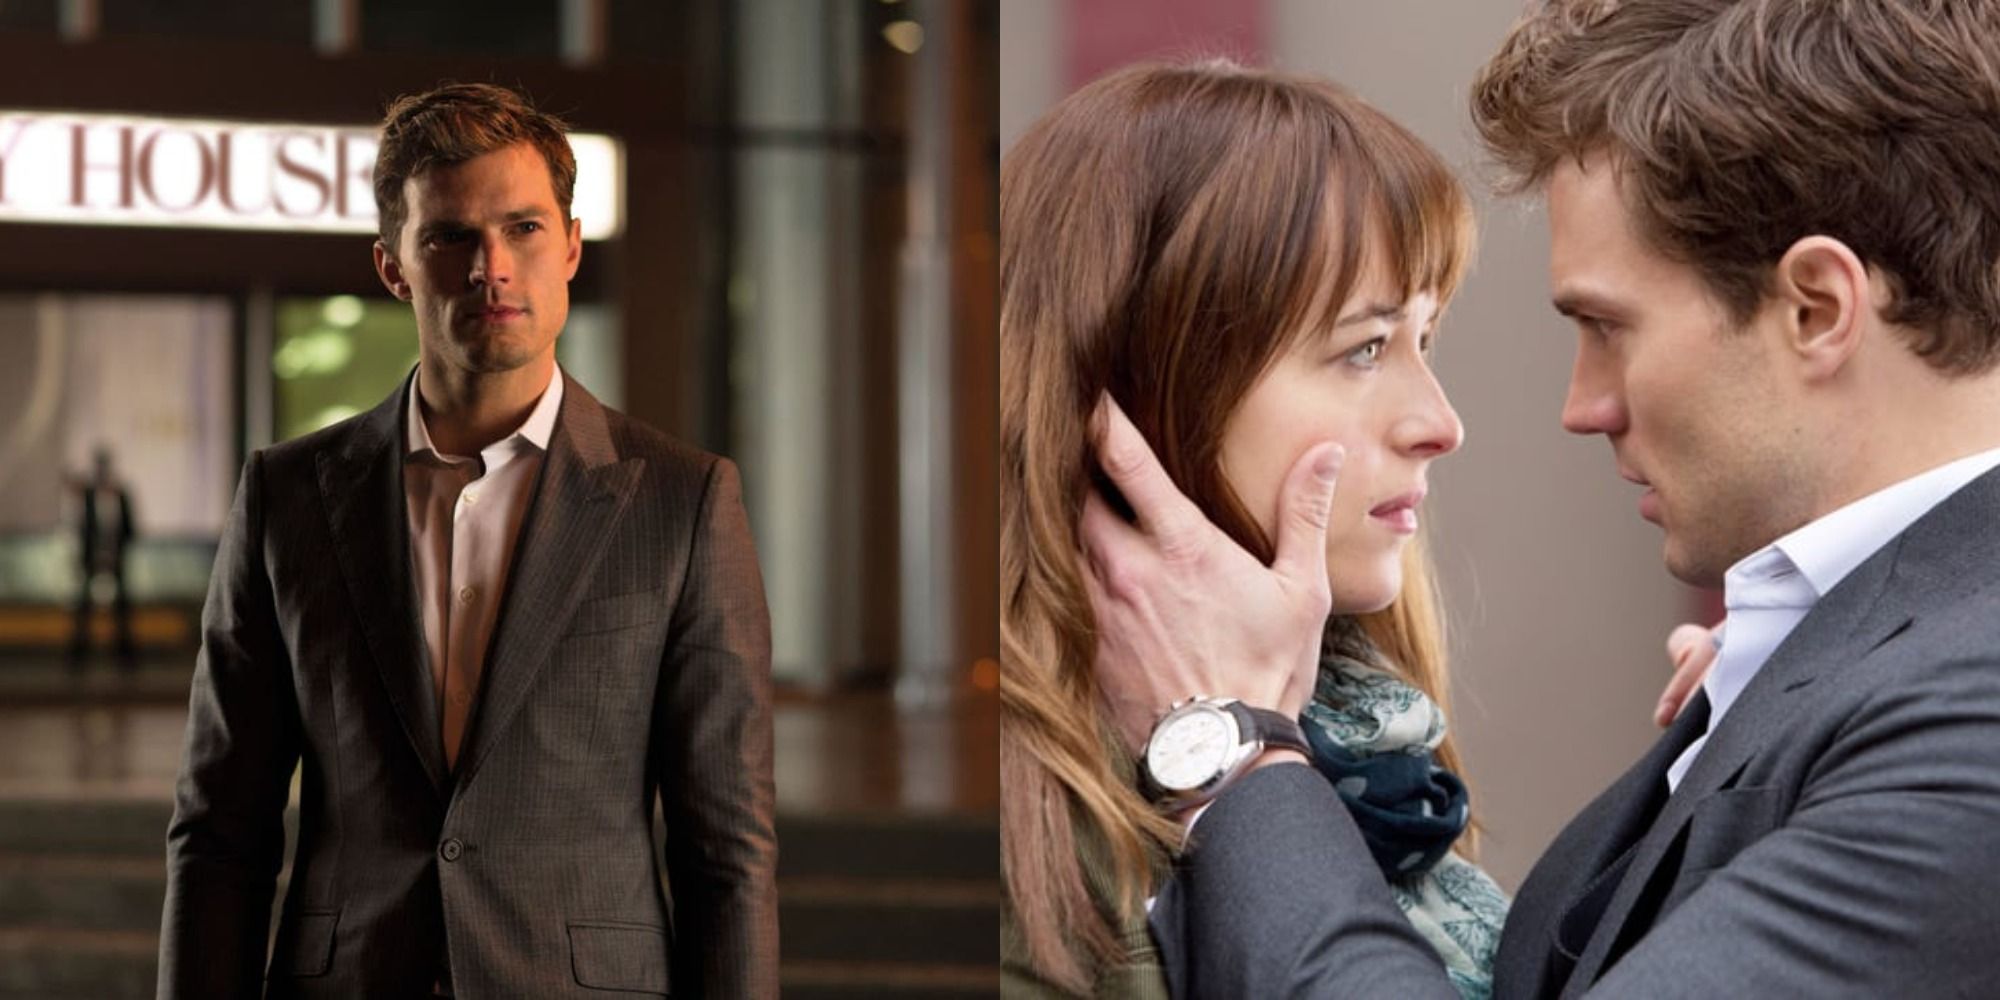 Split image showing Christian Grey alone and with Ana in the Fifty Shades franchise